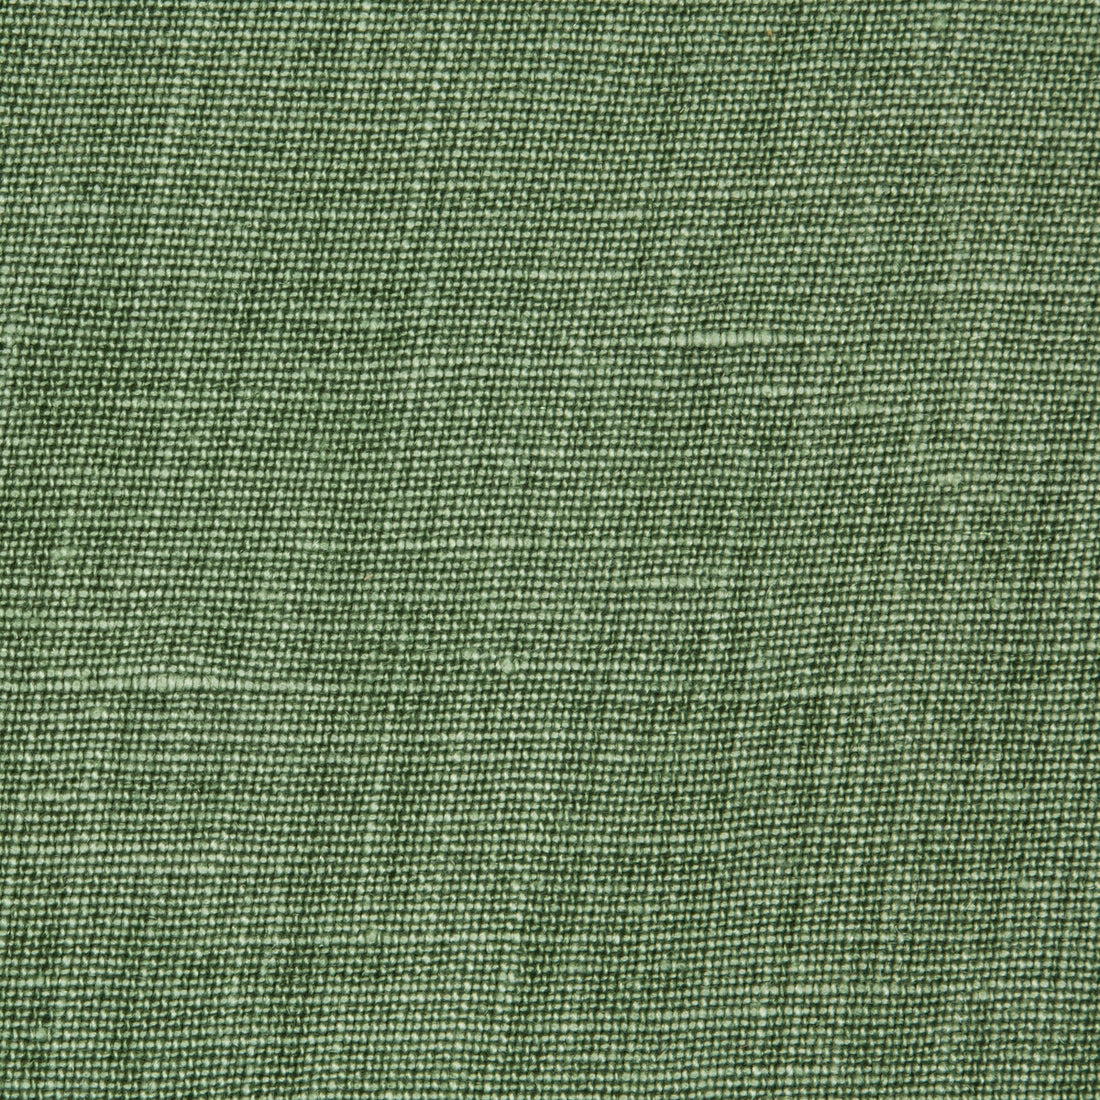 Weathered Linen fabric in fern color - pattern BF10962.775.0 - by G P &amp; J Baker in the Baker House Linens collection